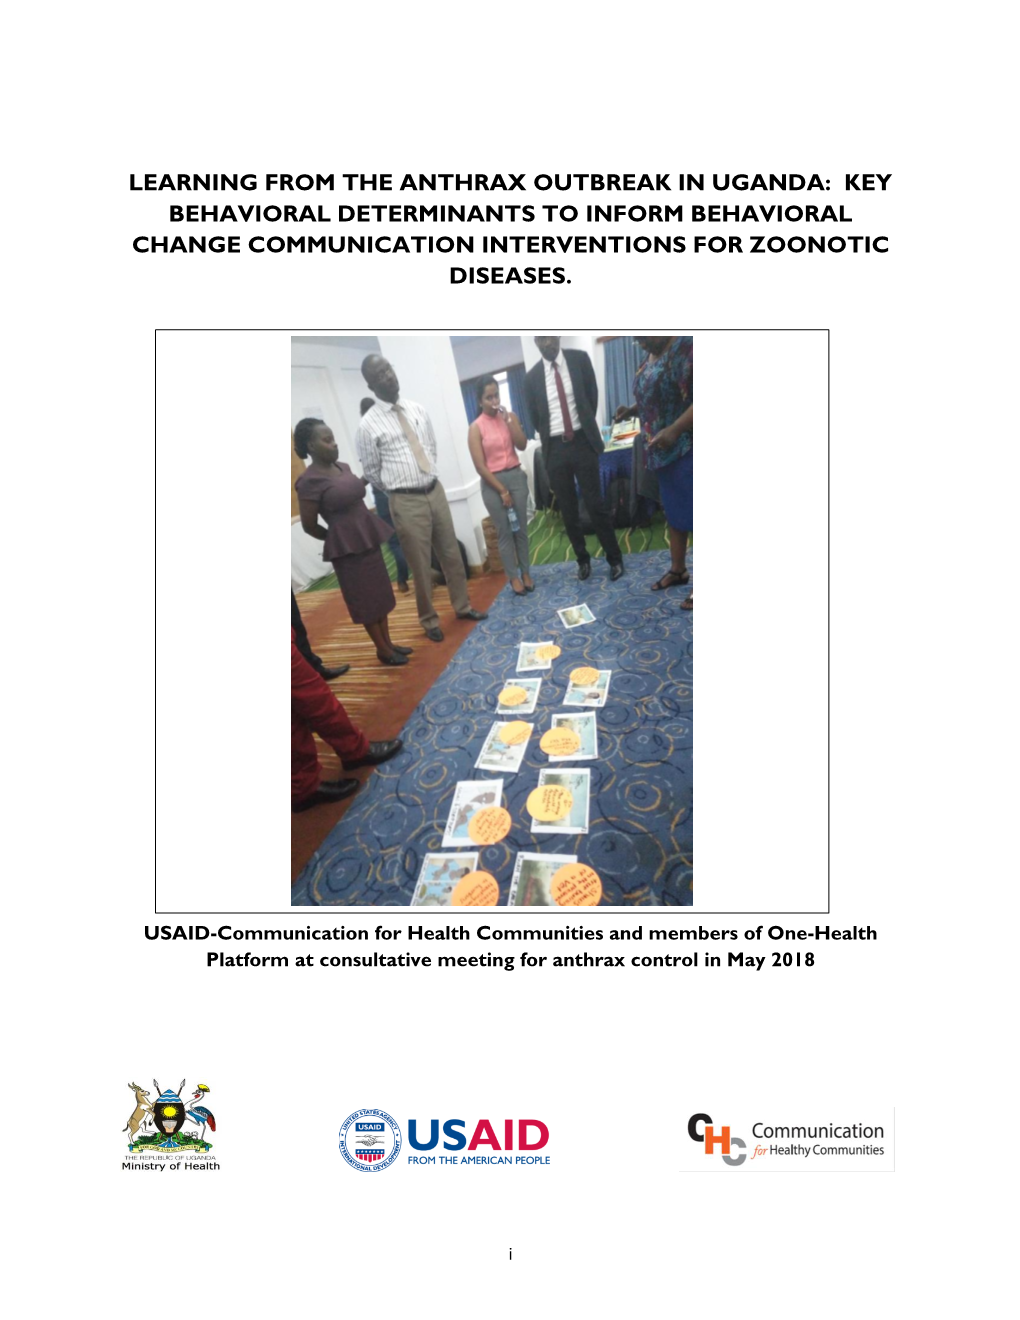 Learning from the Anthrax Outbreak in Uganda: Key Behavioral Determinants to Inform Behavioral Change Communication Interventions for Zoonotic Diseases